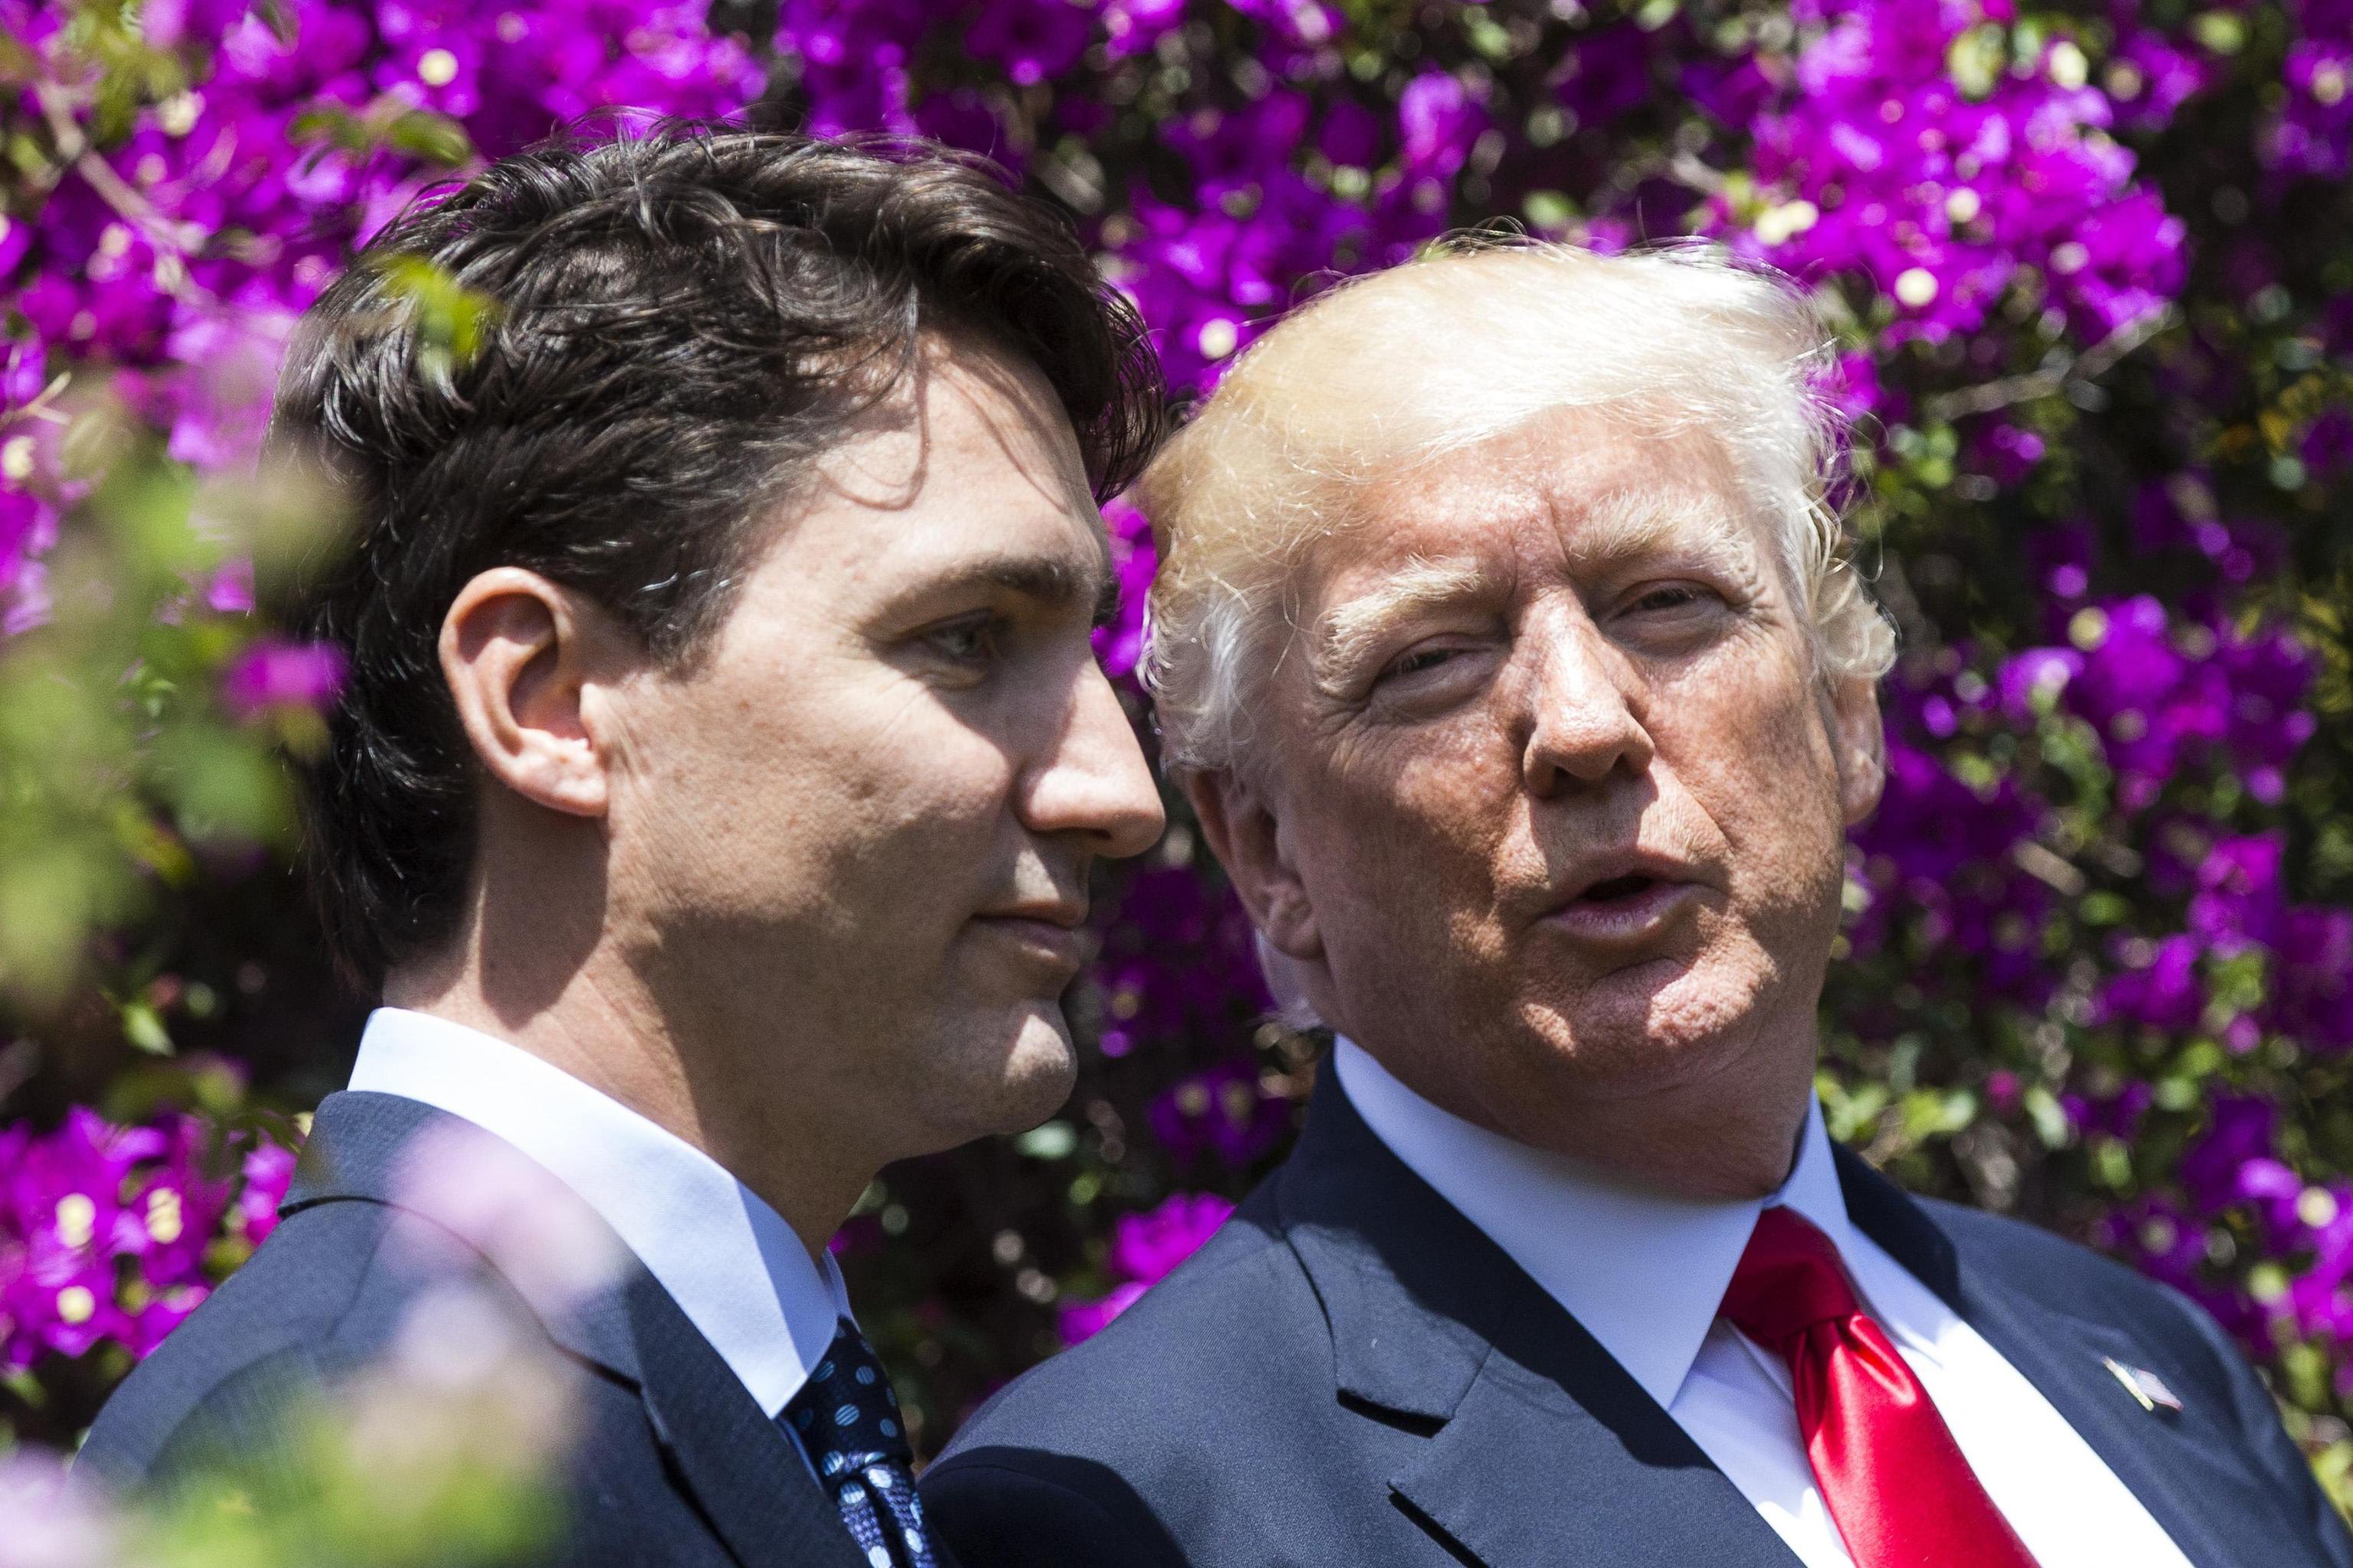 2017-05-27 08:31:48 epa05992916 US President Donald J. Trump (R) and Canadian Prime Minister Justin Trudeau (L) walk together after posing for a group photo on the second day of the G7 Summit at the Hotel San Domenico in Taormina, Sicily, Italy, 27 May 2017. The second day is scheduled to deal with Innovationand Development in Africa, Global Issues such as Human Mobility, Food Security and Gender Equality as well as the G7 Global Relations, the Italian G7 Presidency said in a media release. Heads of States and of Governments of the G7, the group of most industrialized economies, plus the European Union, meet in Taormina, Italy, from 26 to 27 May 2017 for a summit titled 'Building the Foundations of Renewed Trust'. EPA/ANGELO CARCONI